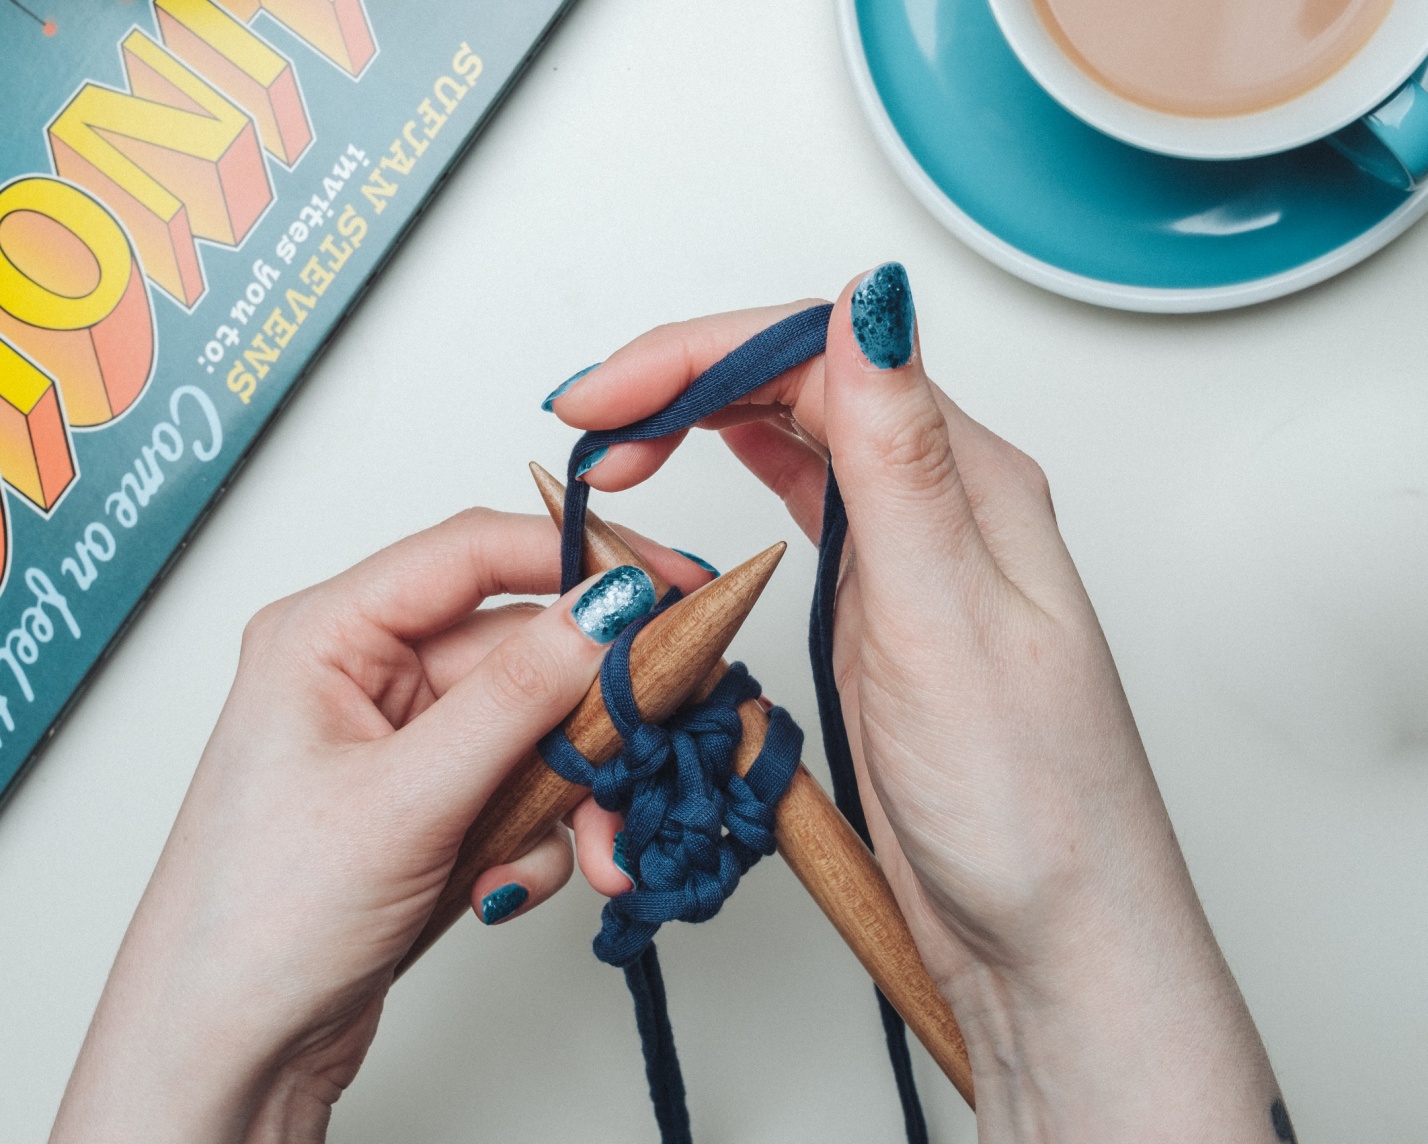 person tying blue lace on two brown sticks beside teal and white ceramic teacup set